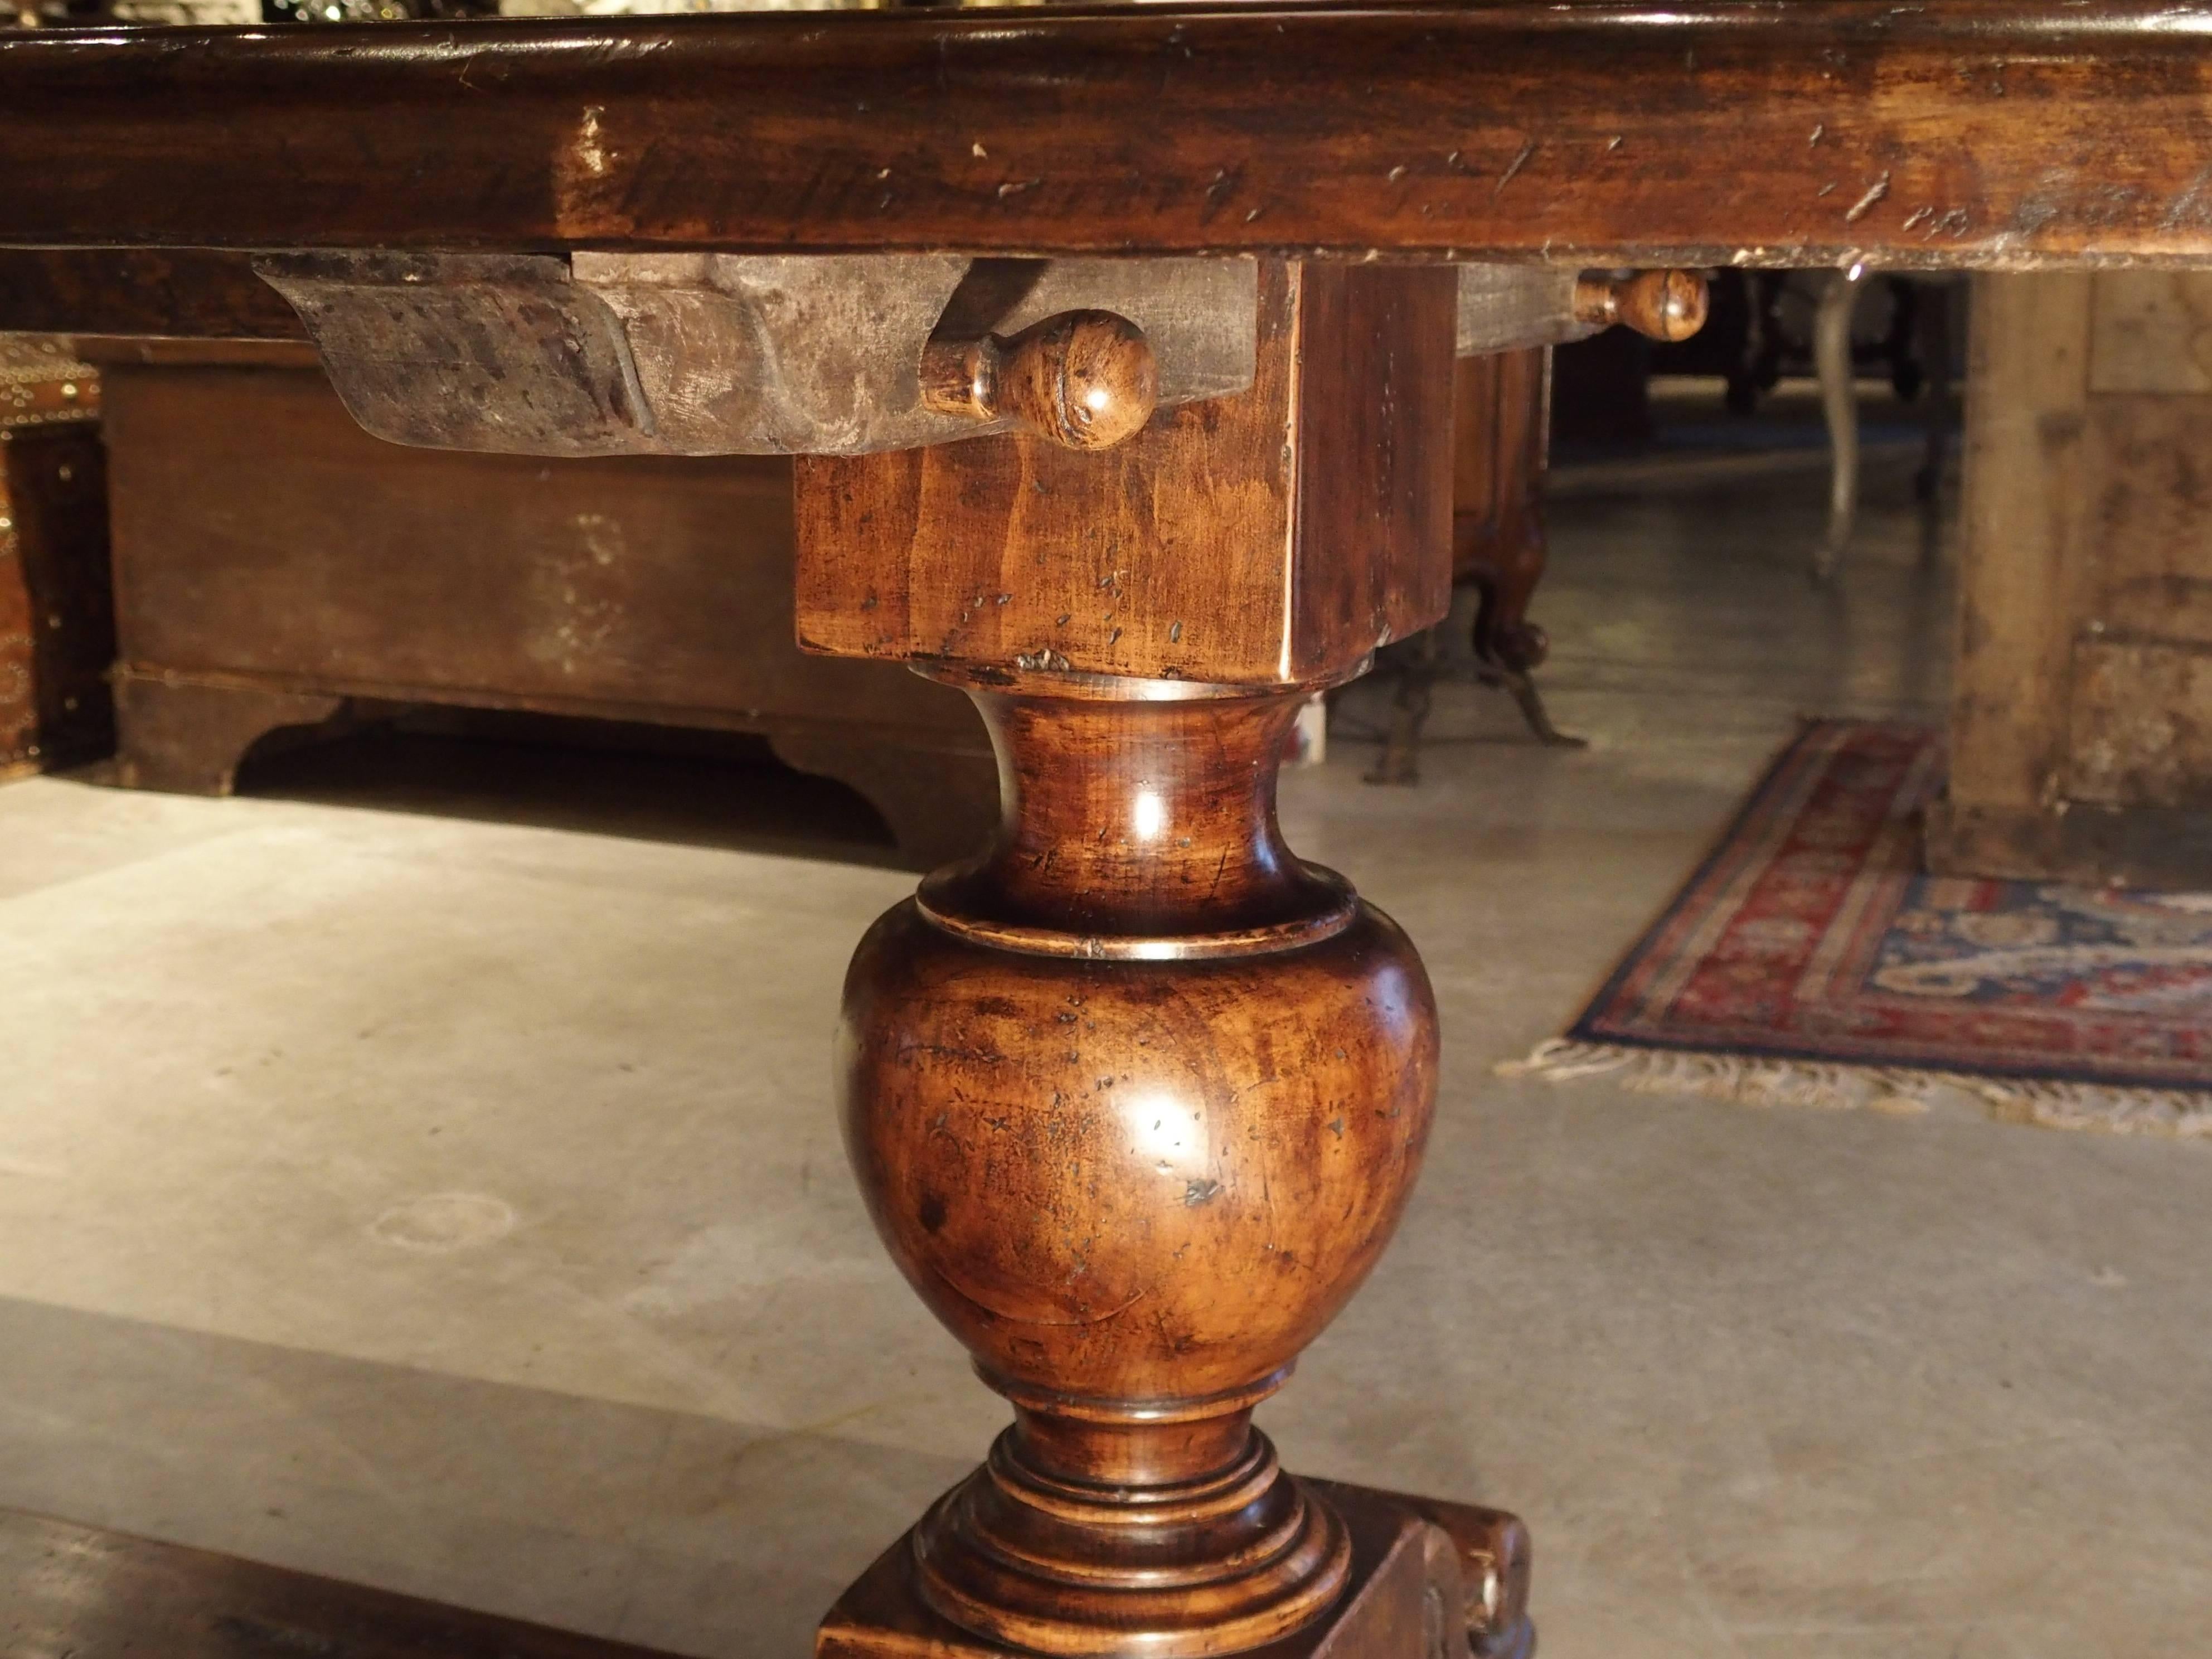 This stunning and long Italian table has been made from walnut wood. It has three round baluster shaped legs with volute feet on either end and at the center. We believe the legs to be more recent, while the top is made from salvaged wood. Under the